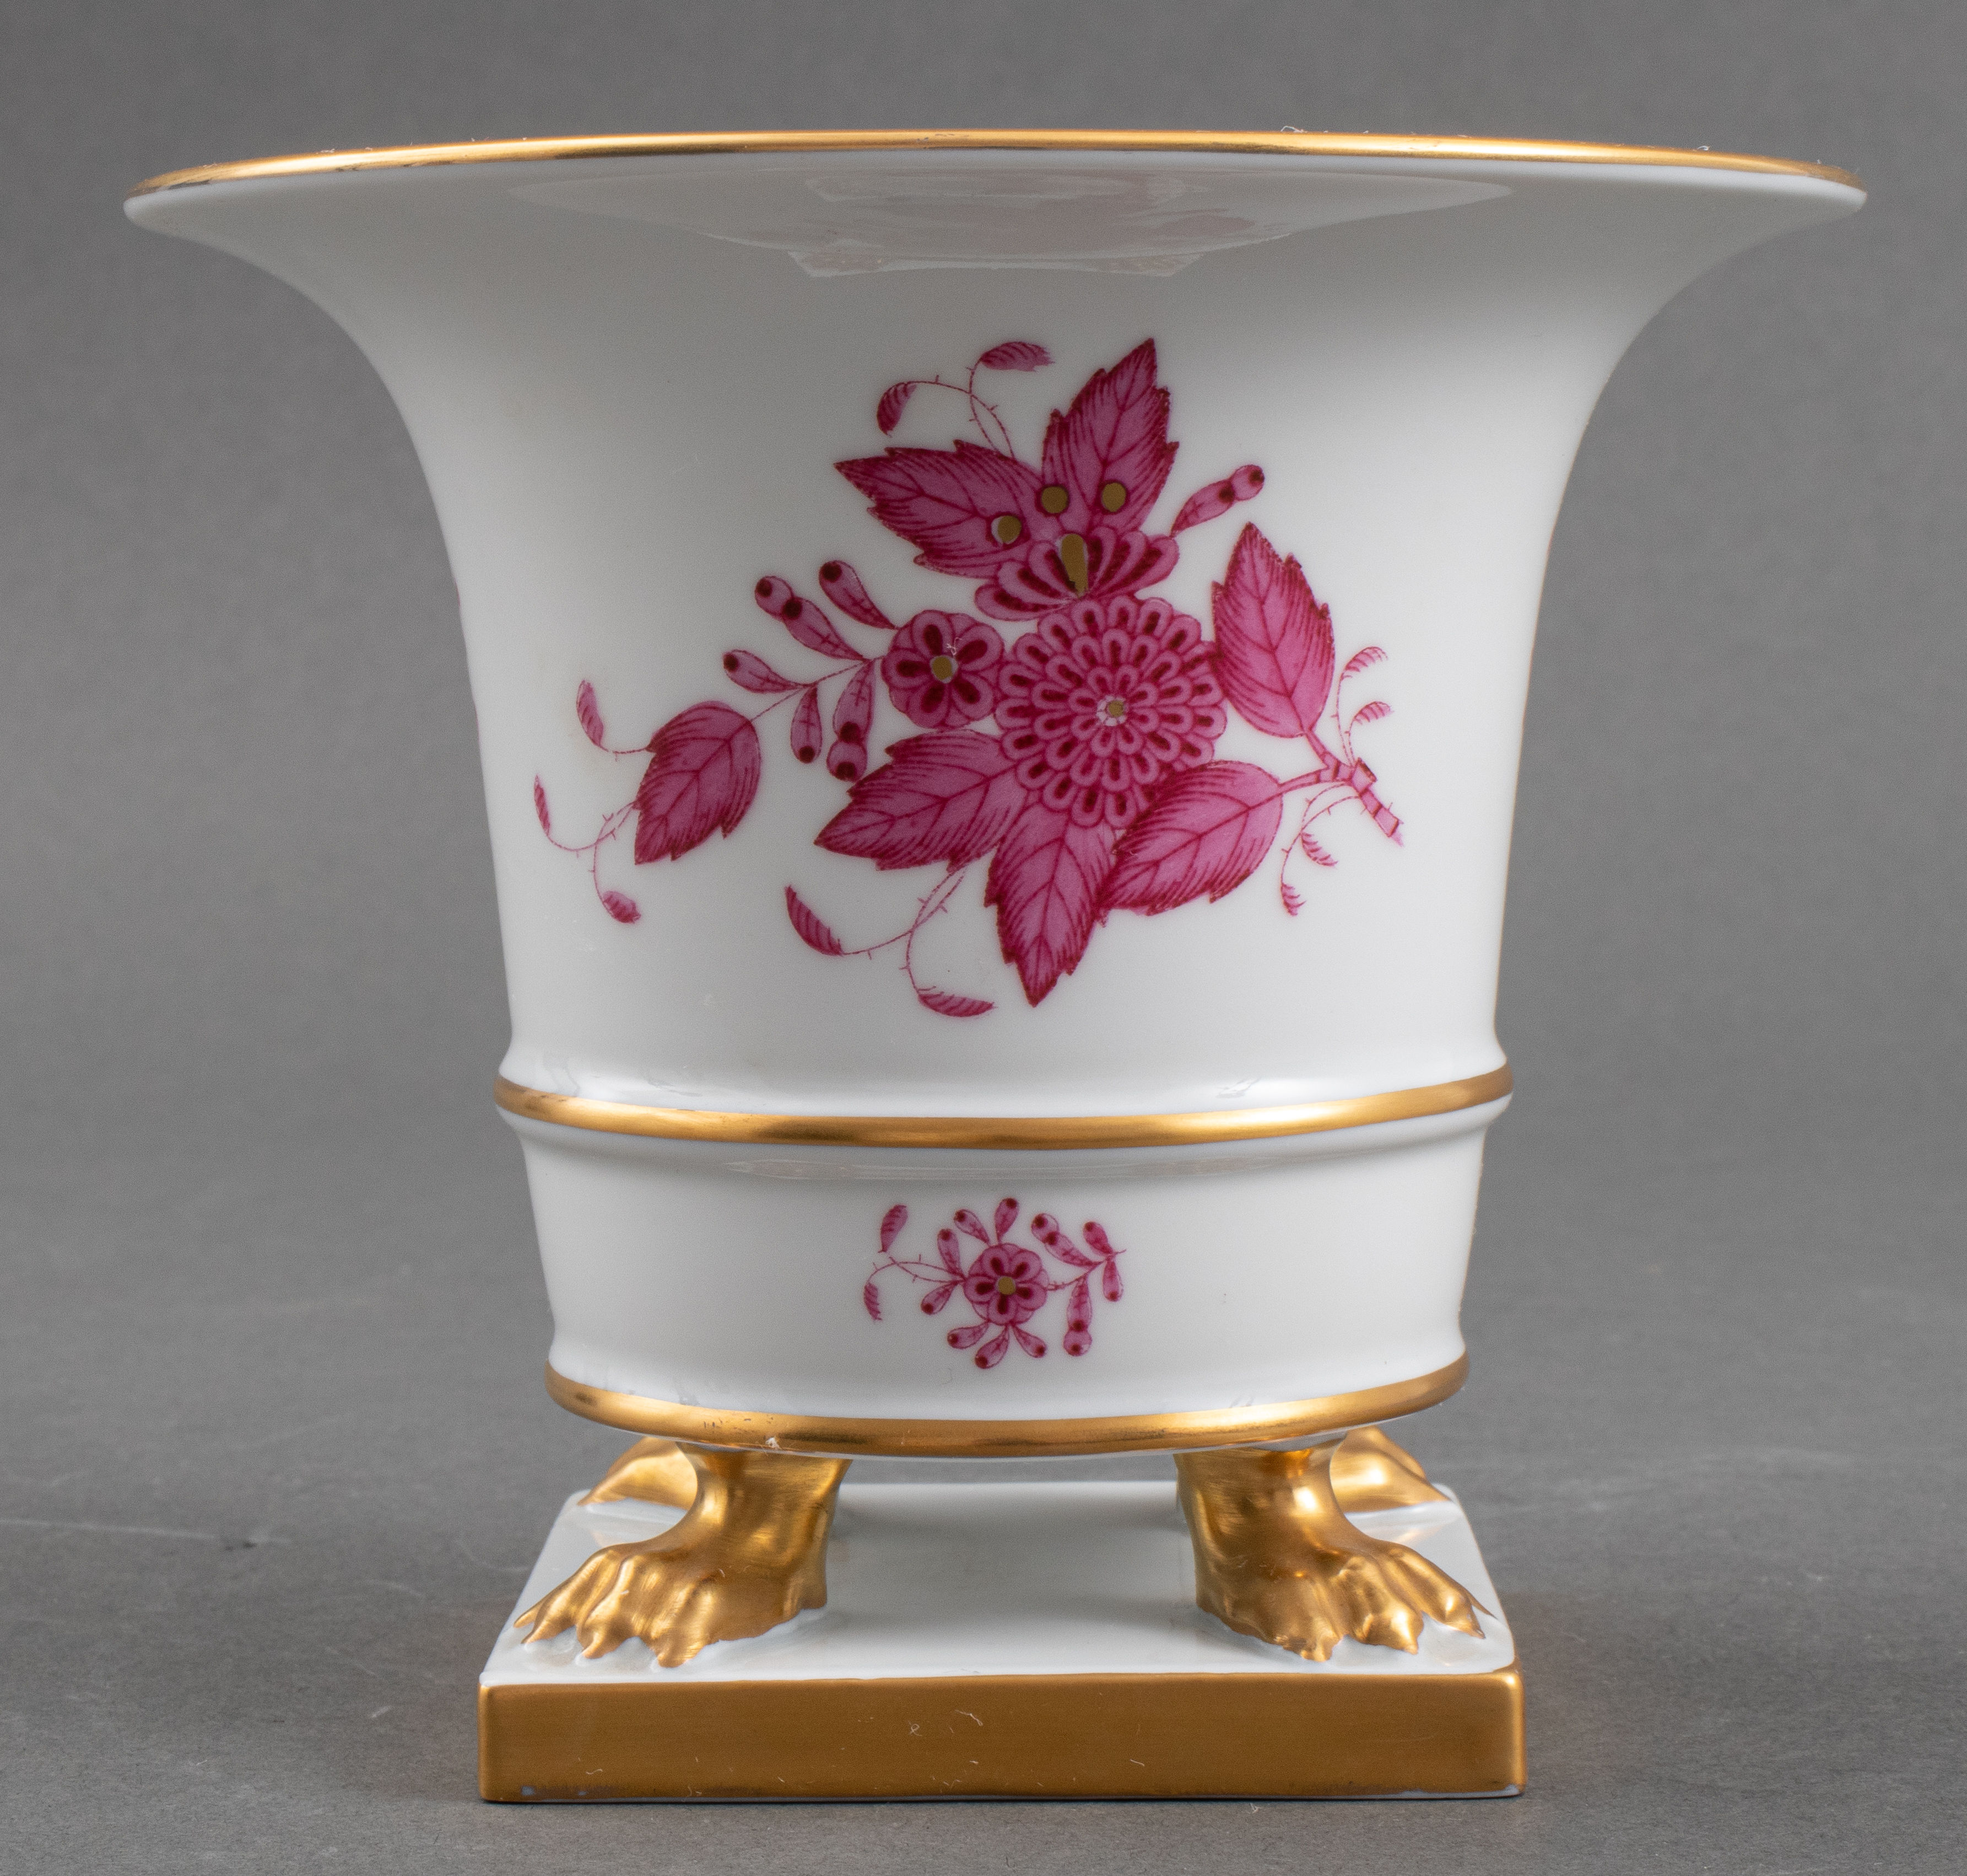 HEREND CACHEPOT "CHINESE BOUQUET"